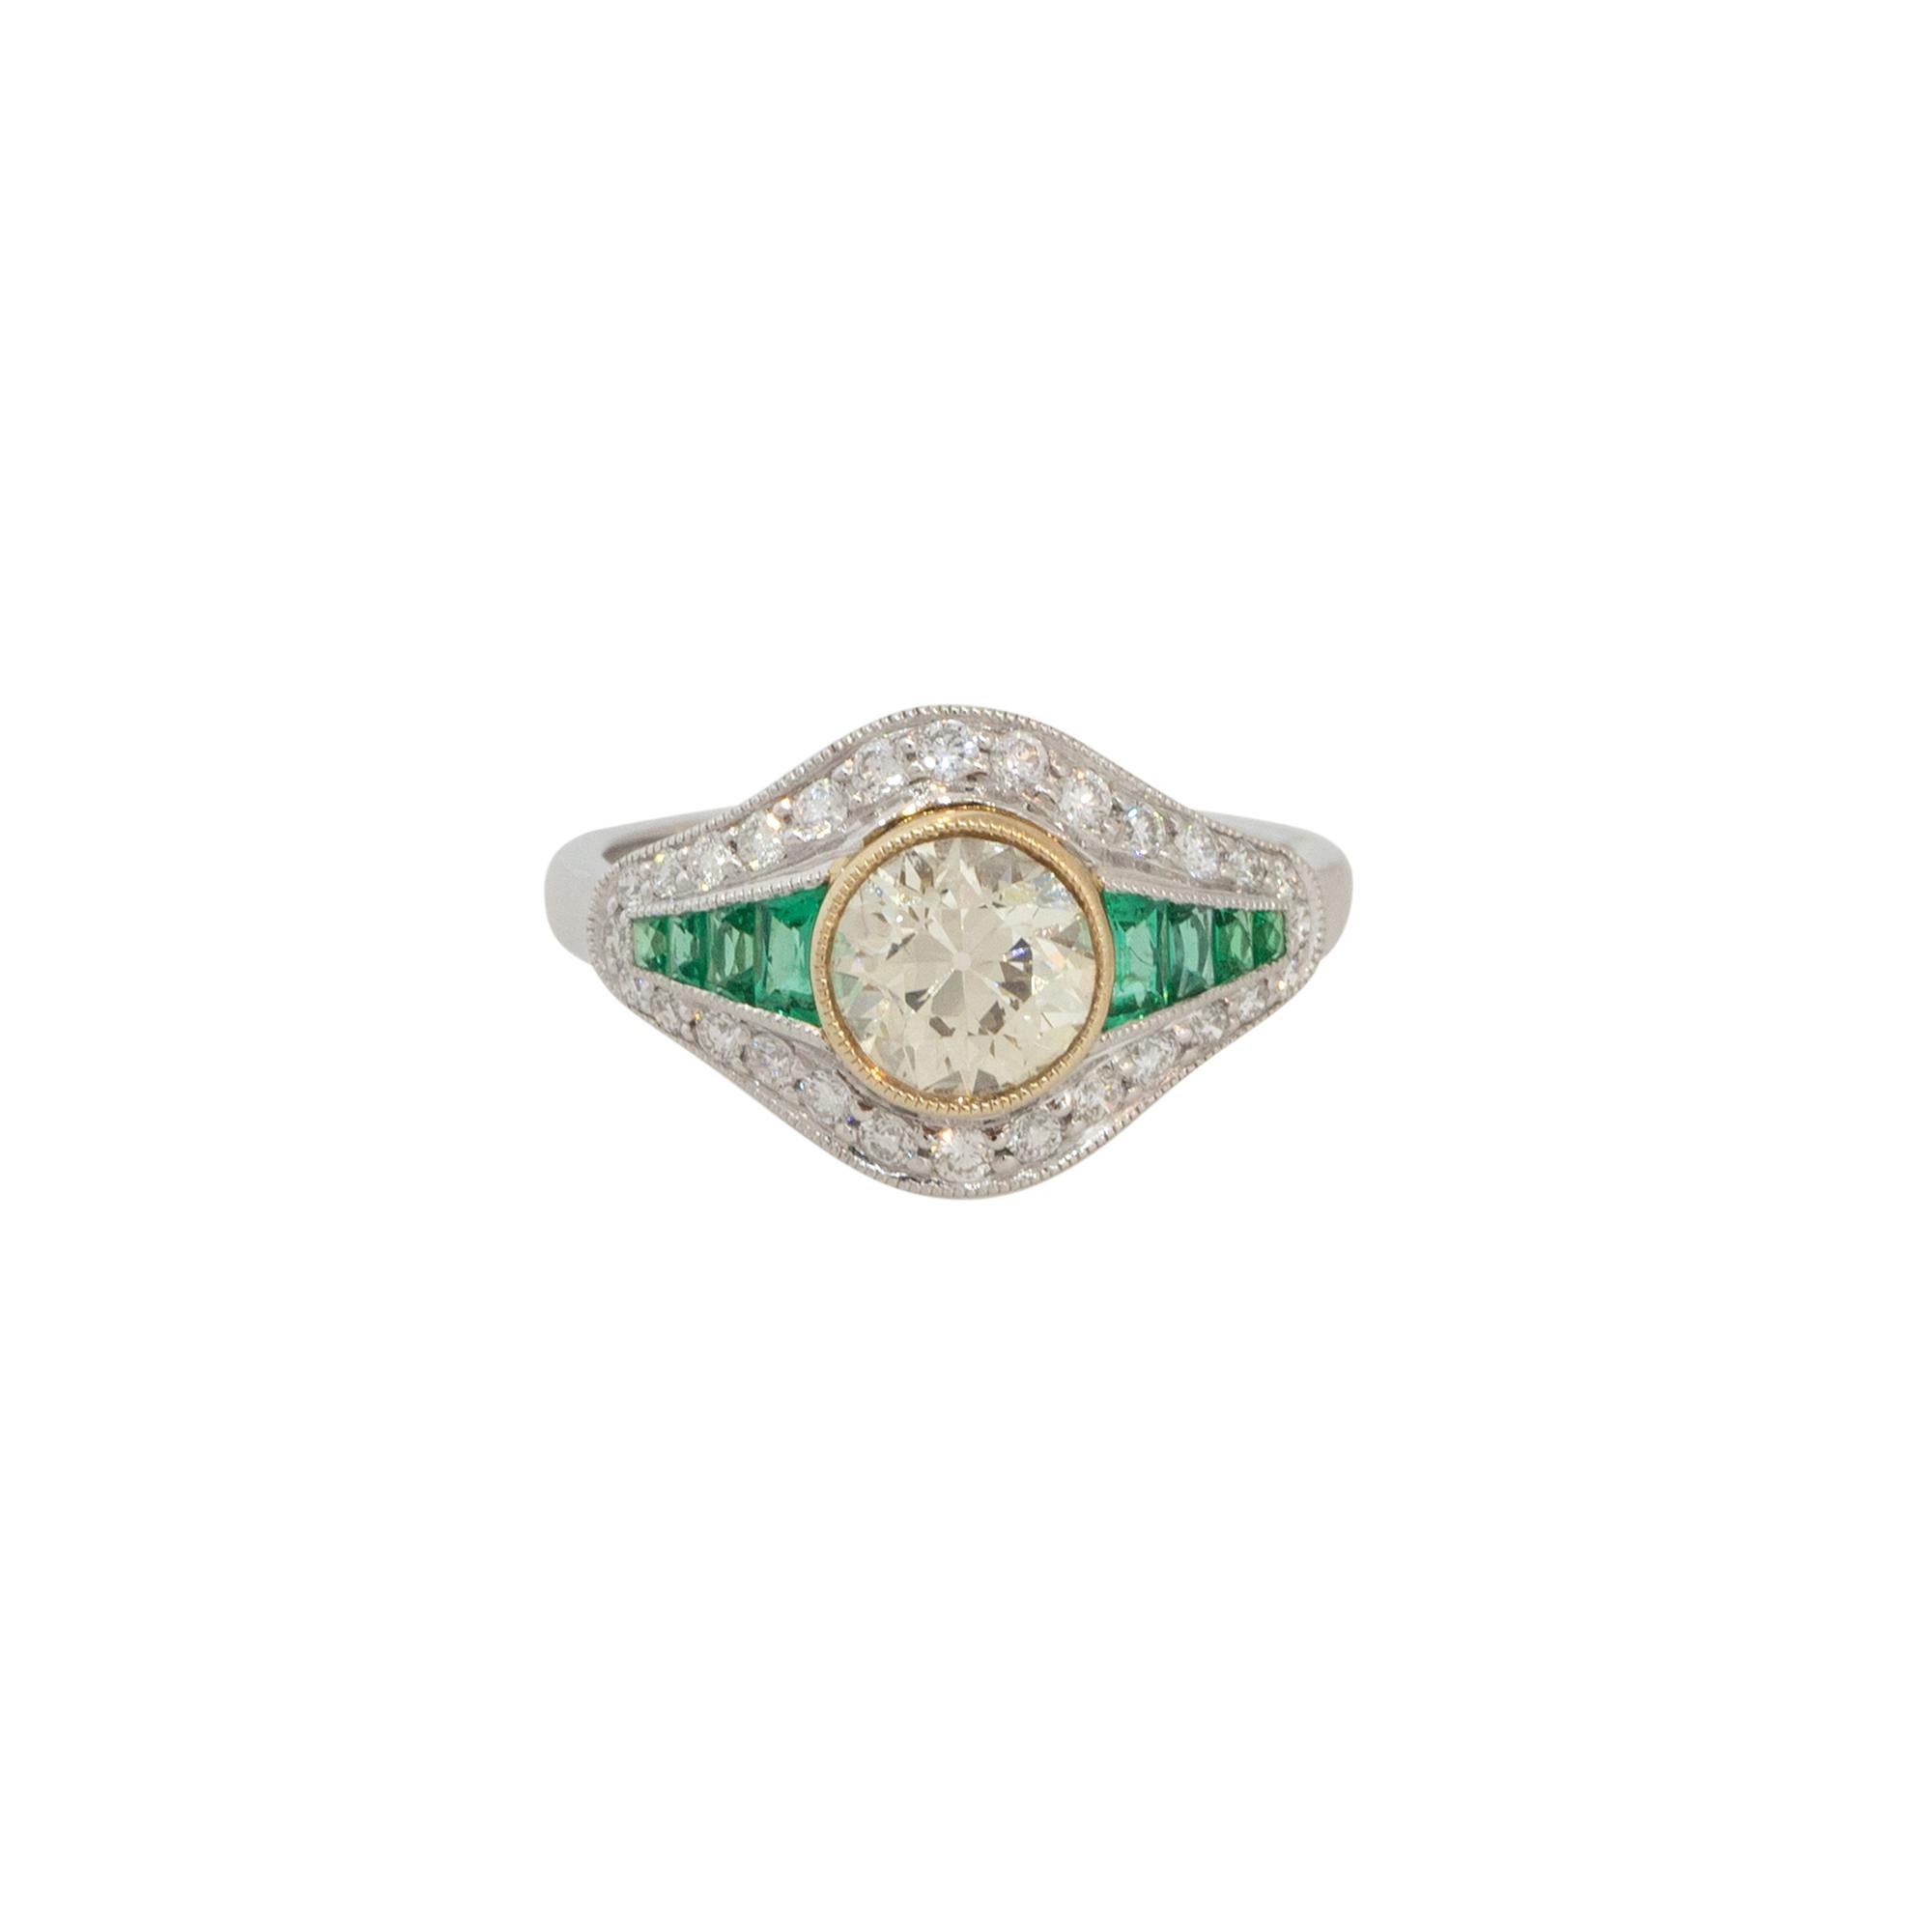 1.46 Carat Diamond and Emerald Art Deco Style Ring Platinum in Stock In Excellent Condition For Sale In Boca Raton, FL